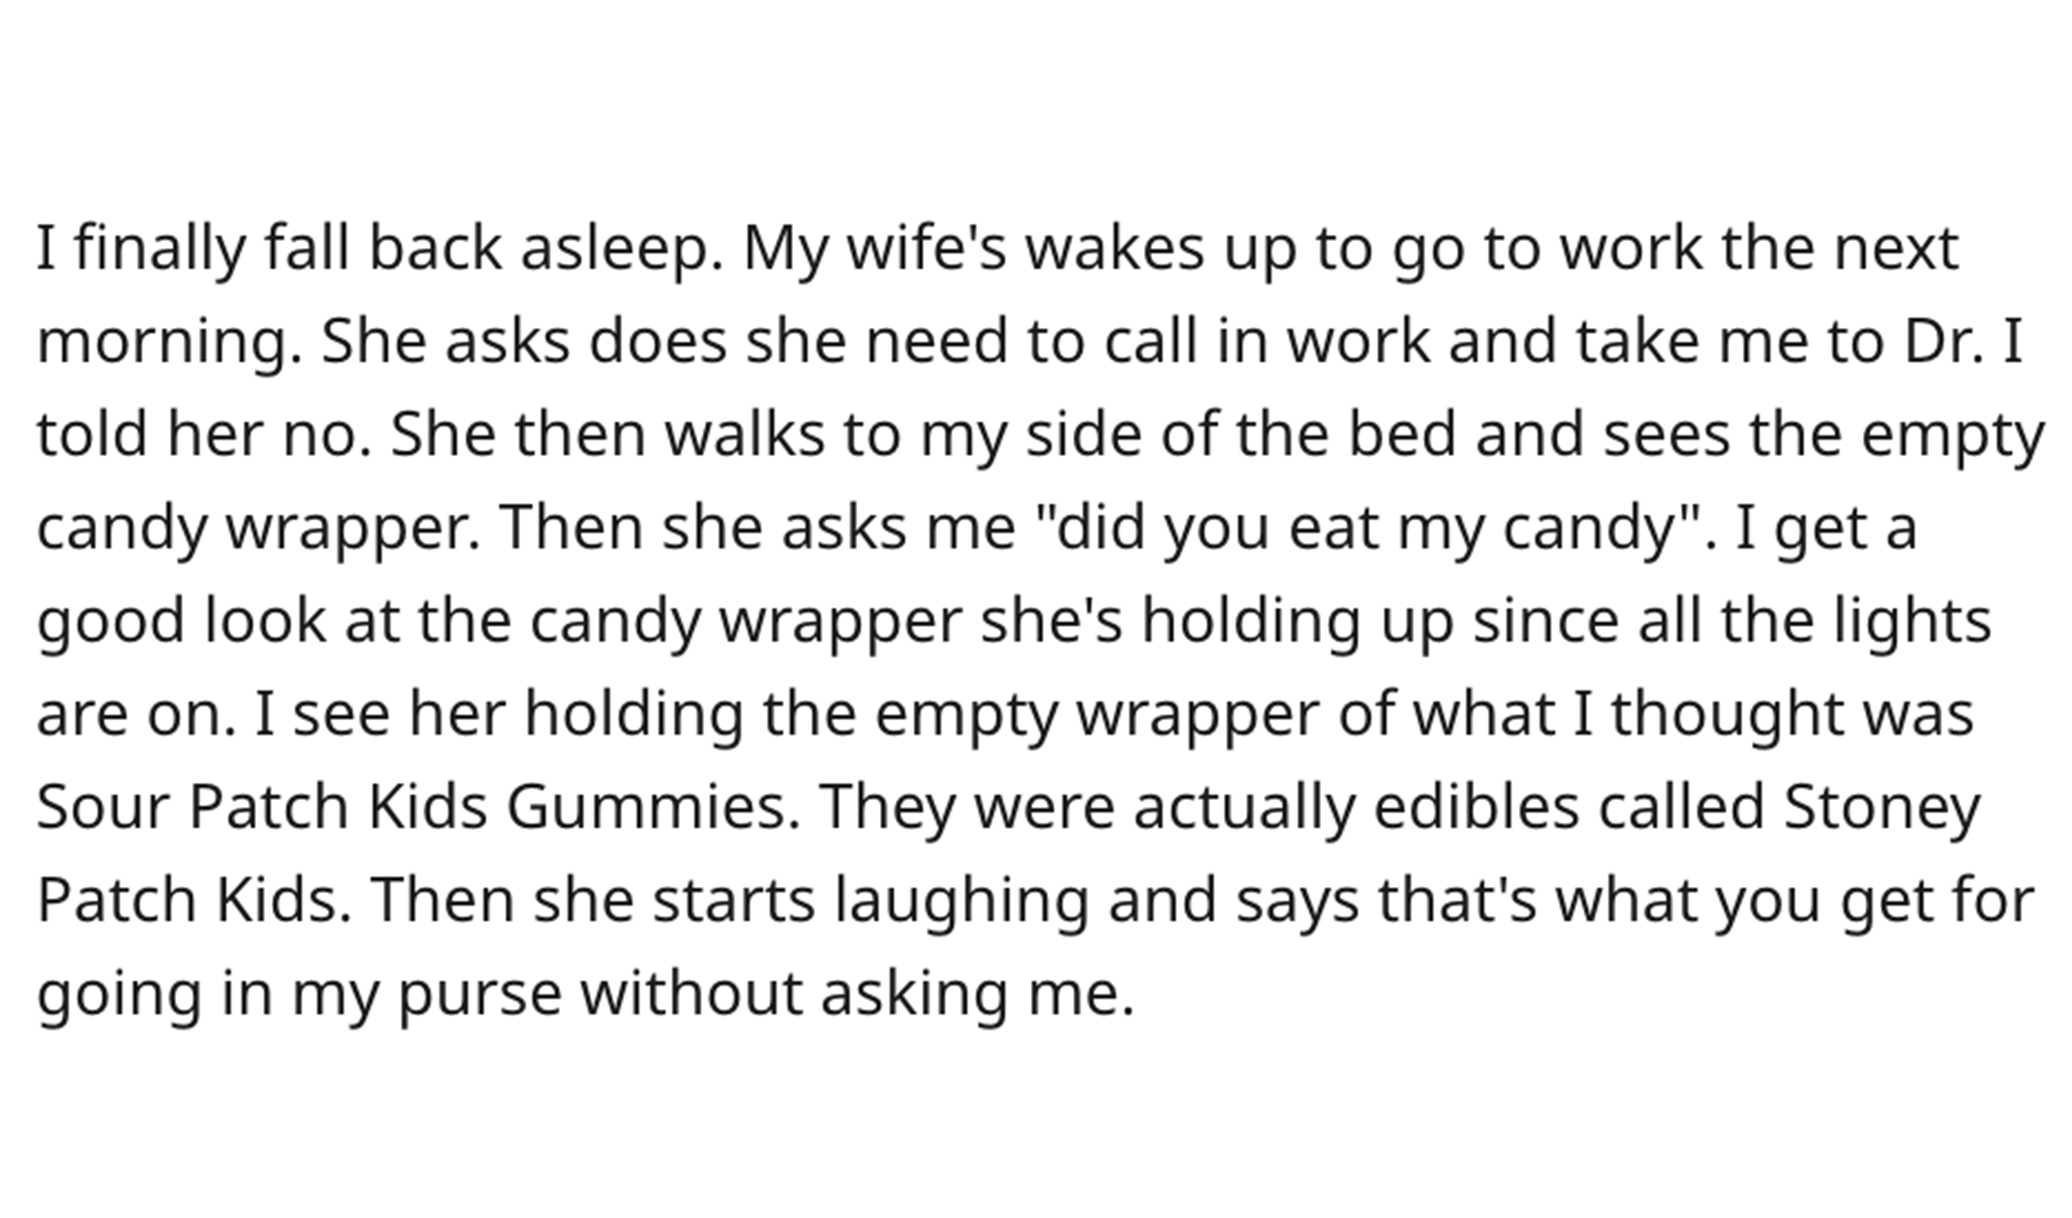 Stoney Patch Kids story reddit - I finally fall back asleep. My wife's wakes up to go to work the next morning. She asks does she need to call in work and take me to Dr. I told her no. She then walks to my side of the bed and sees the empty candy wrapper.